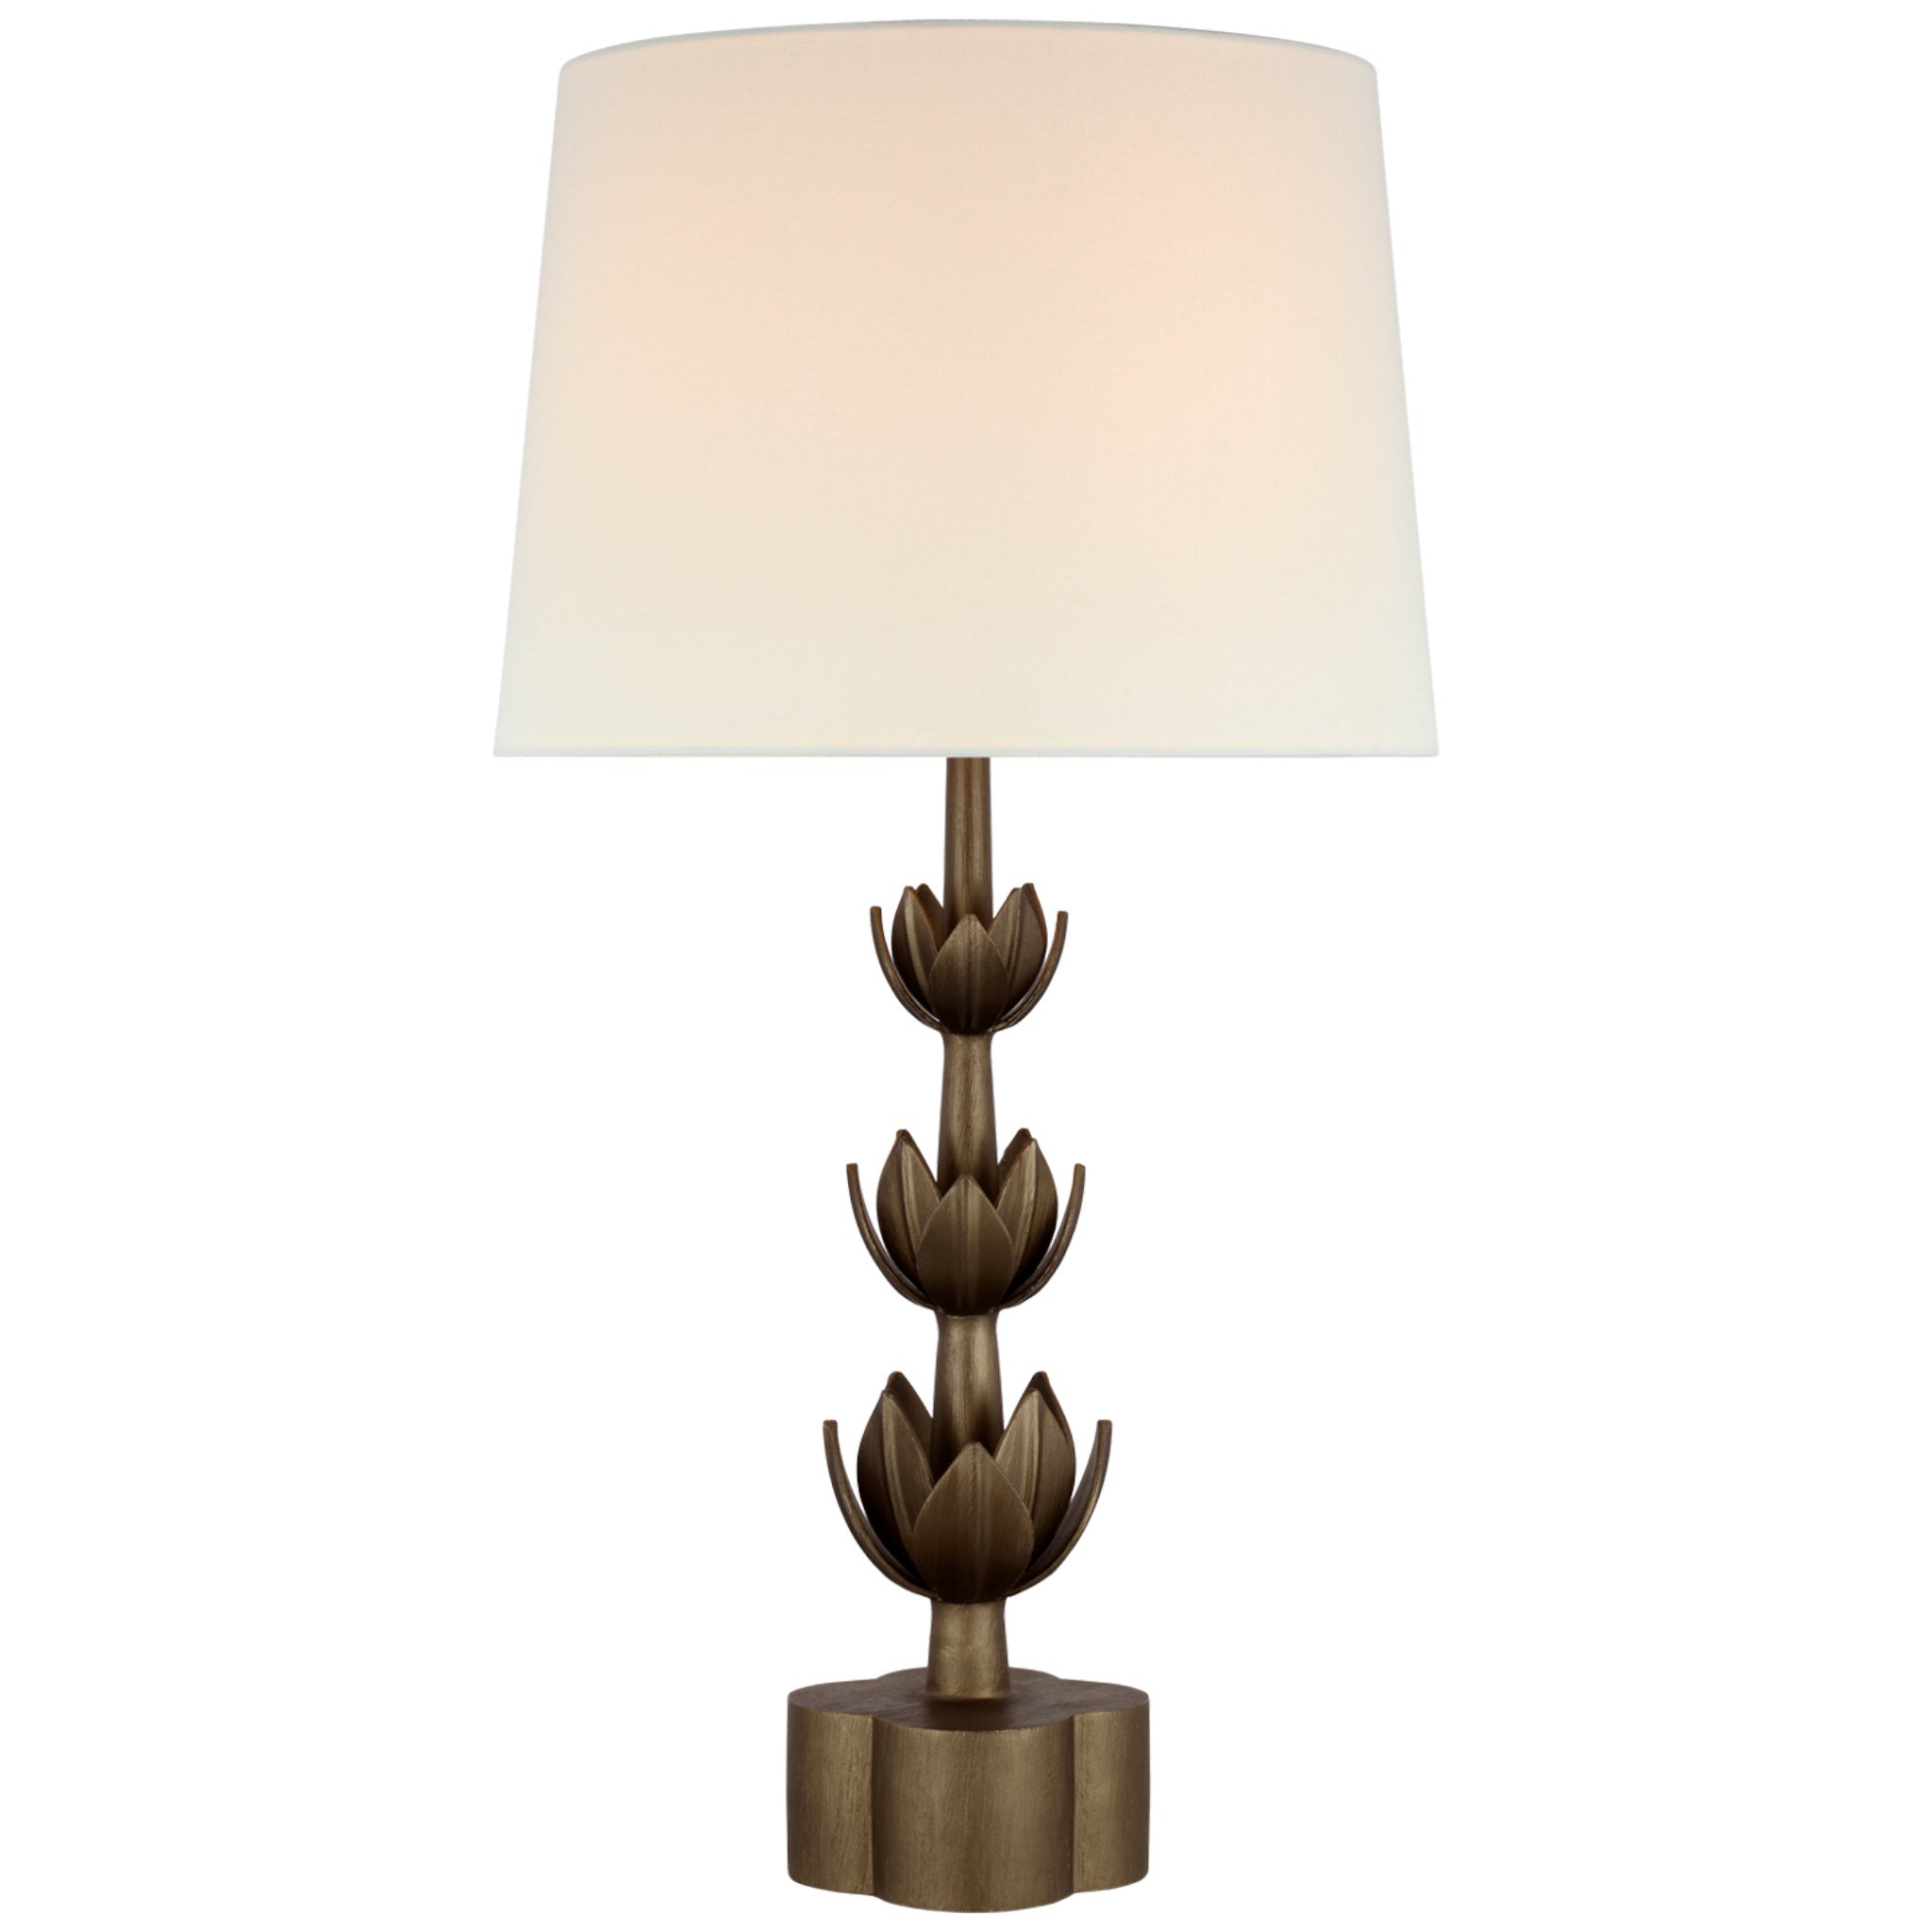 Julie Neill Alberto Large Triple Table Lamp in Antique Bronze Leaf with Linen Shade